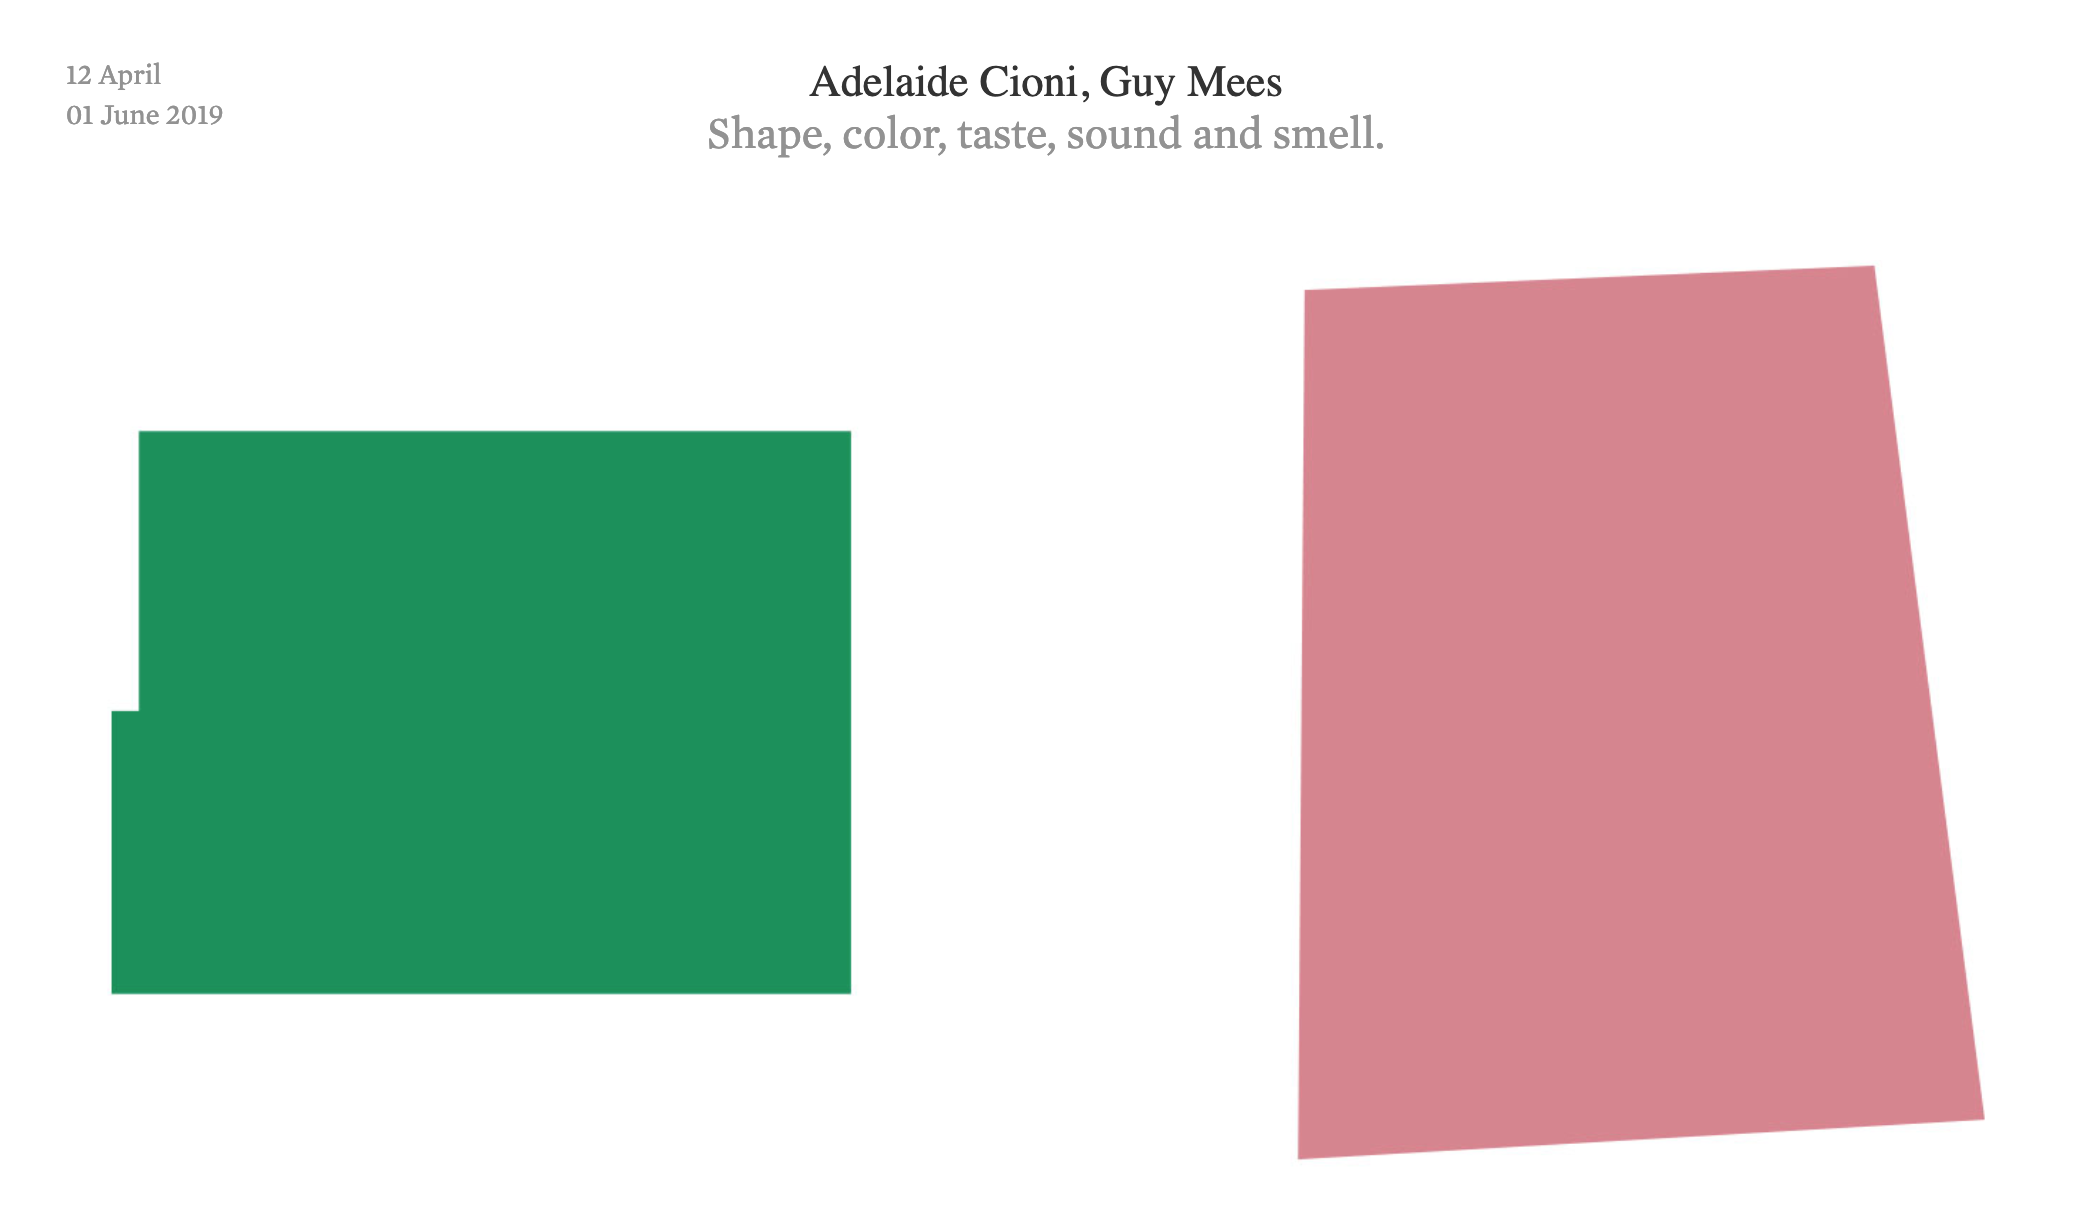 Adelaide Cioni, Guy Mees Shape, color, taste, sound and smell